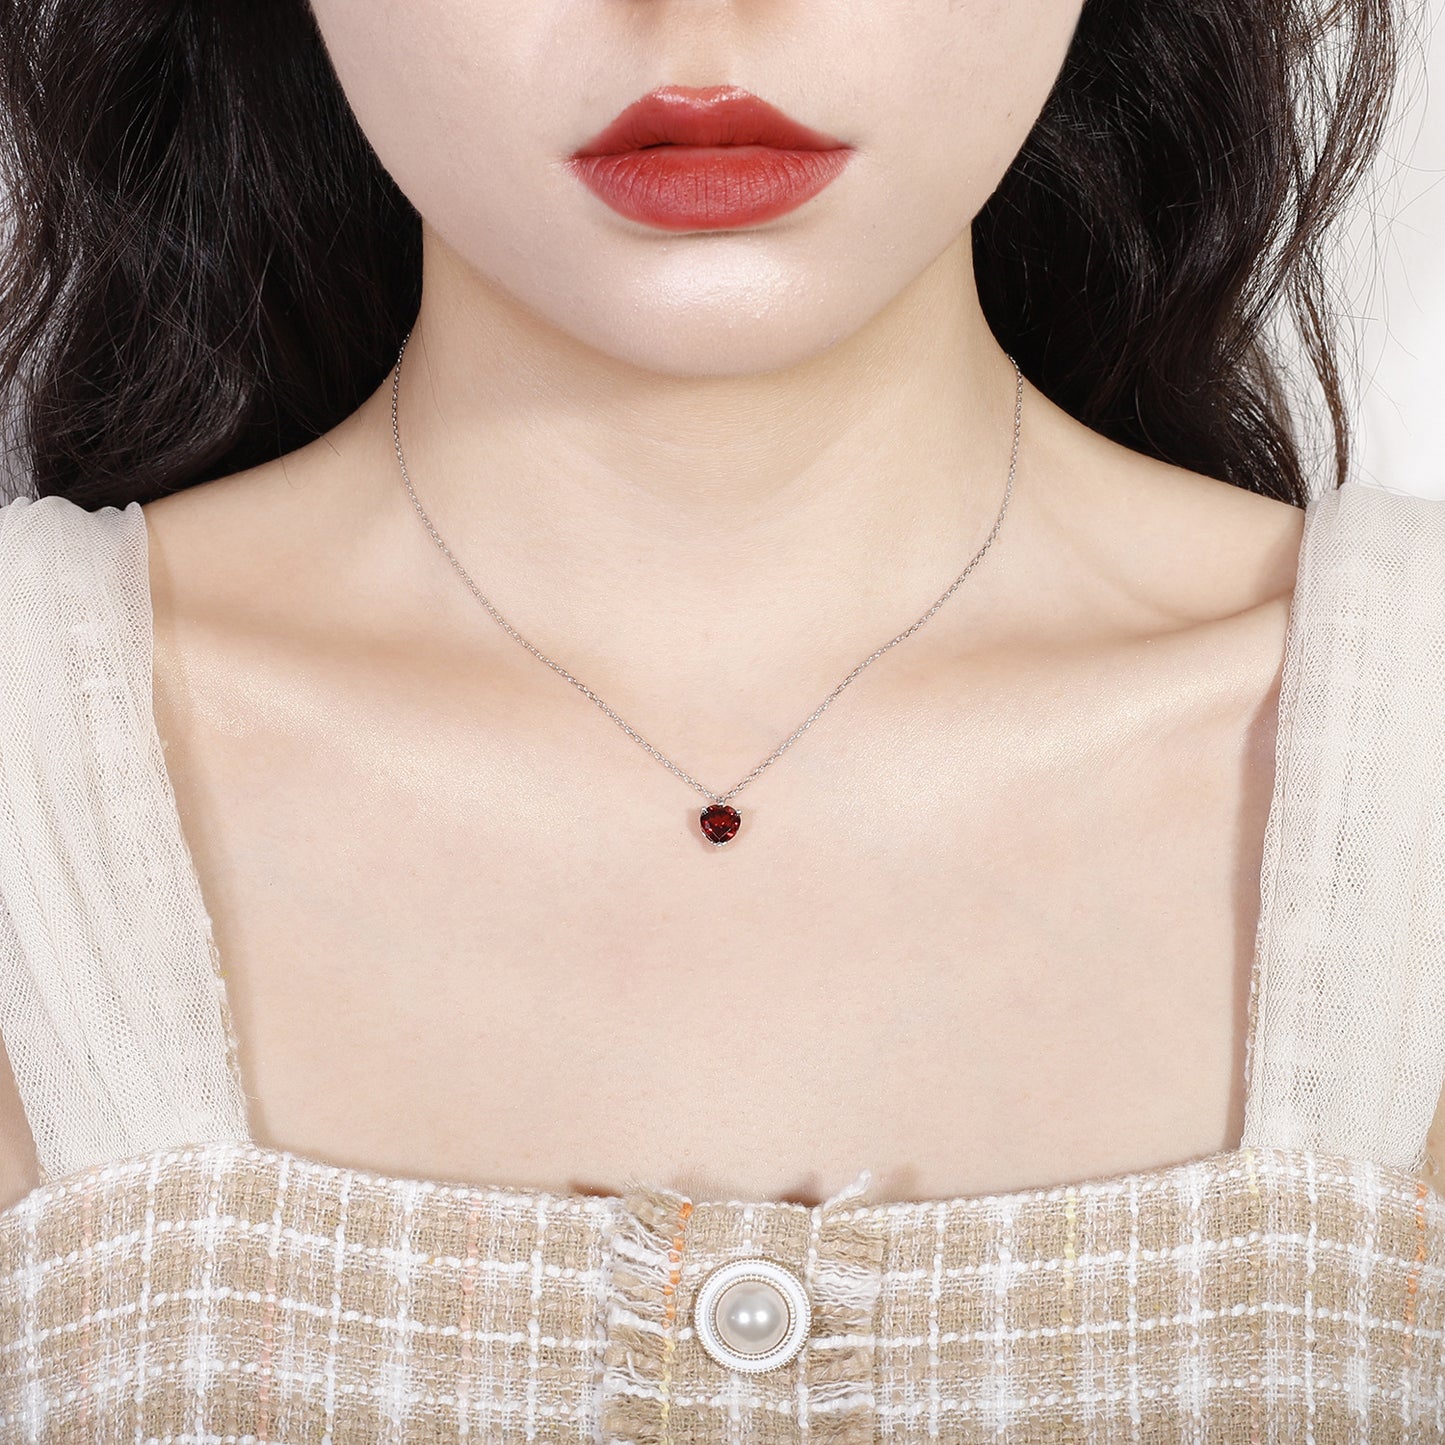 Light Luxury Simple Fashion Design Inlaid Natural Colourful Gemstone Love Pendant Silver Collarbone Necklace for Women